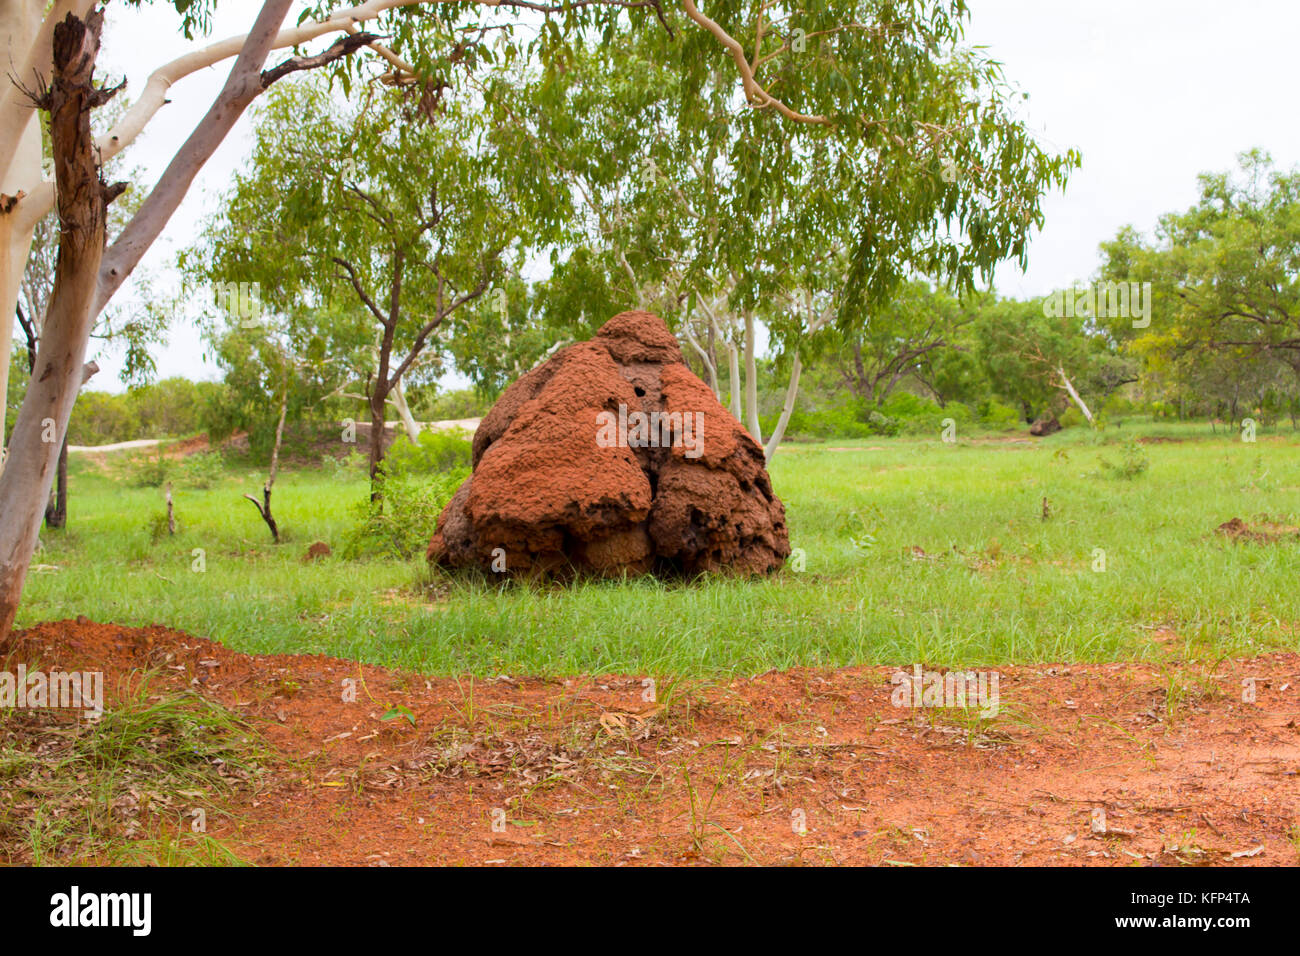 Termite mound ant nests, the most biologically diverse in an entire habitat on the way to Roebuck Bay, Broome, North Western Australia. Stock Photo